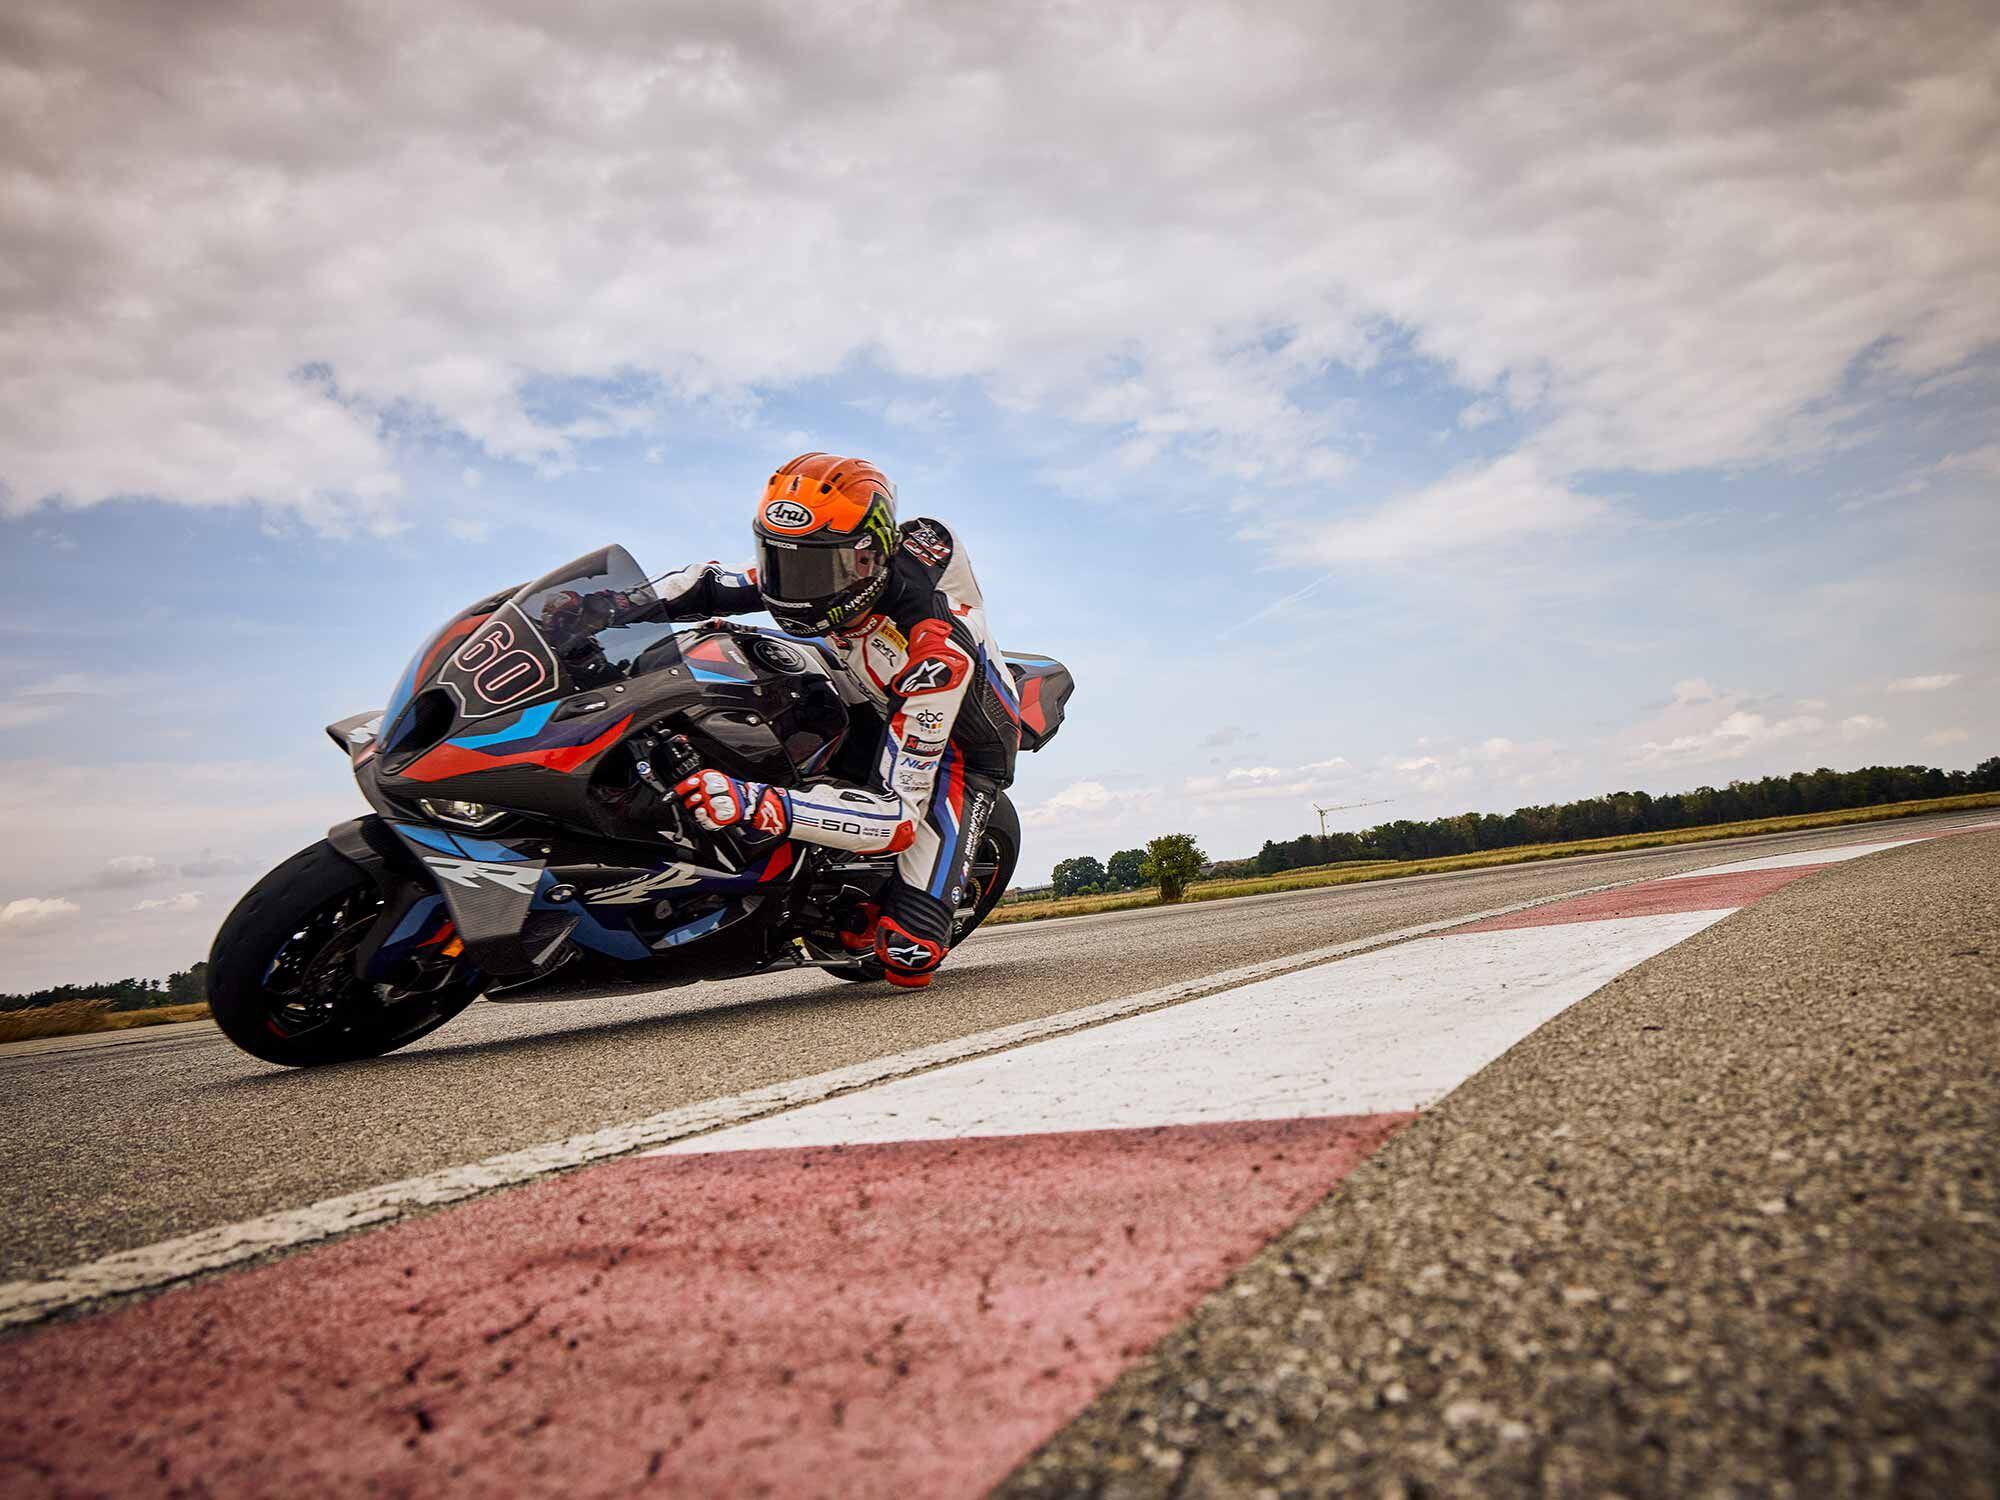 Carving pavement and stabbing through airspace: the 2023 BMW M 1000 RR.